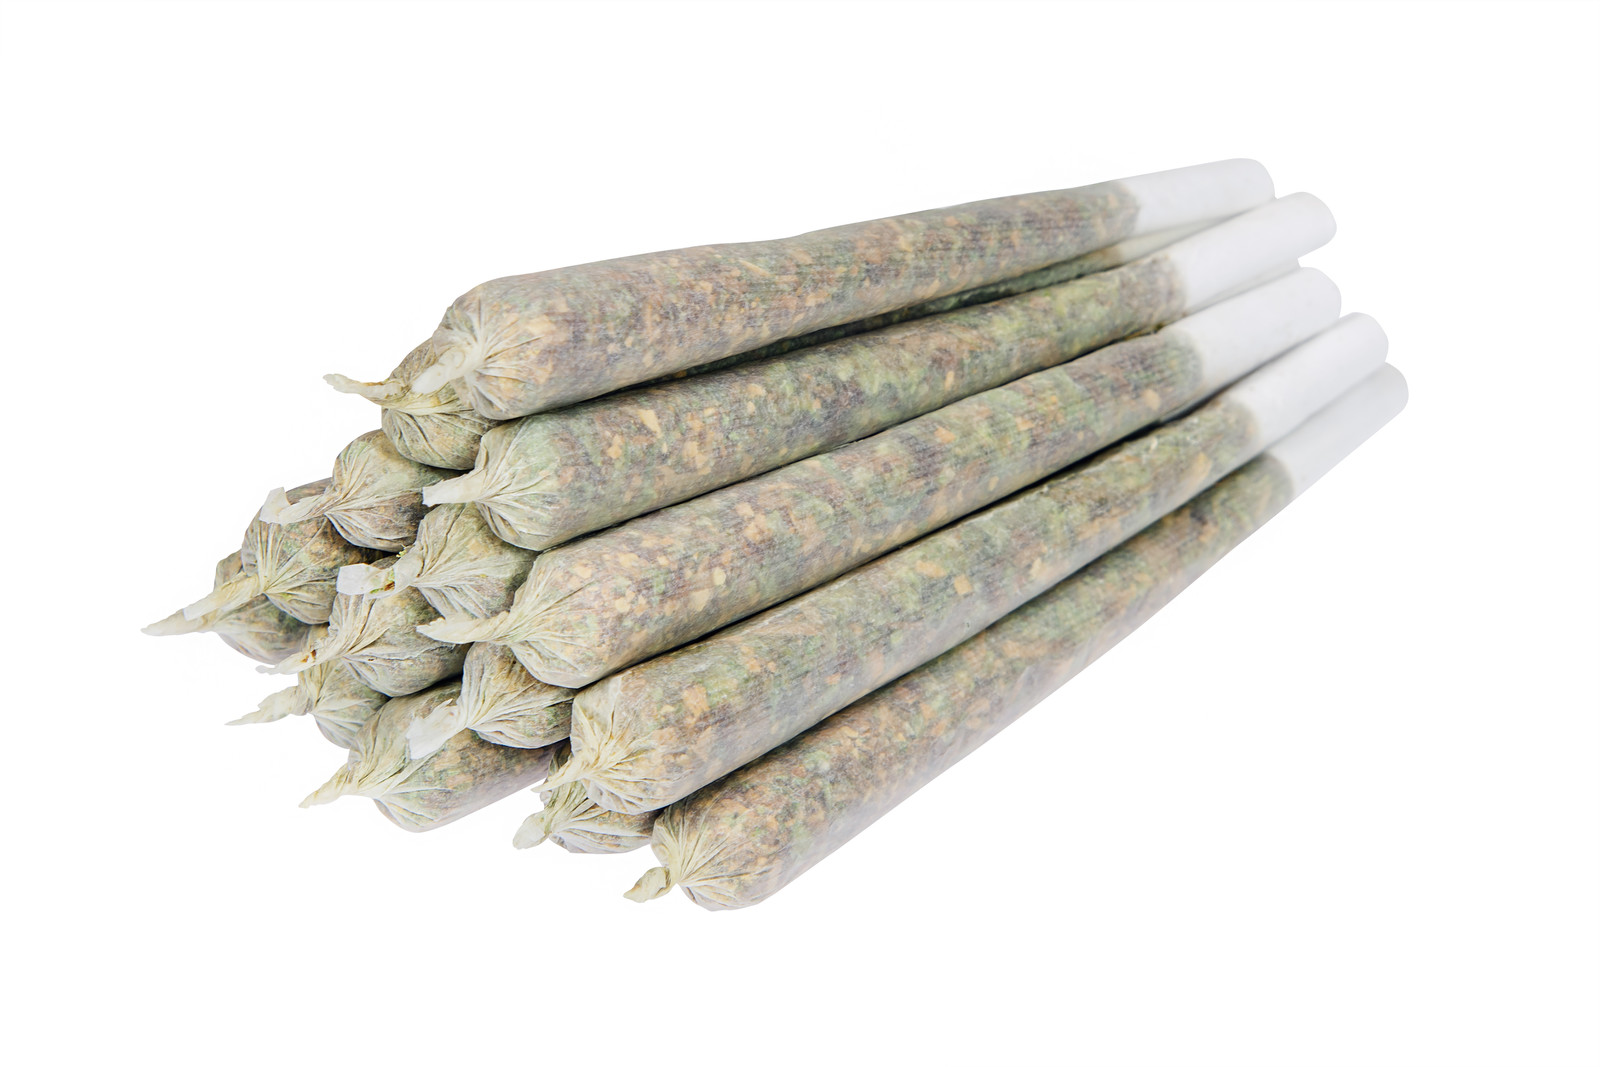 Prerolled pile of cannabis joints